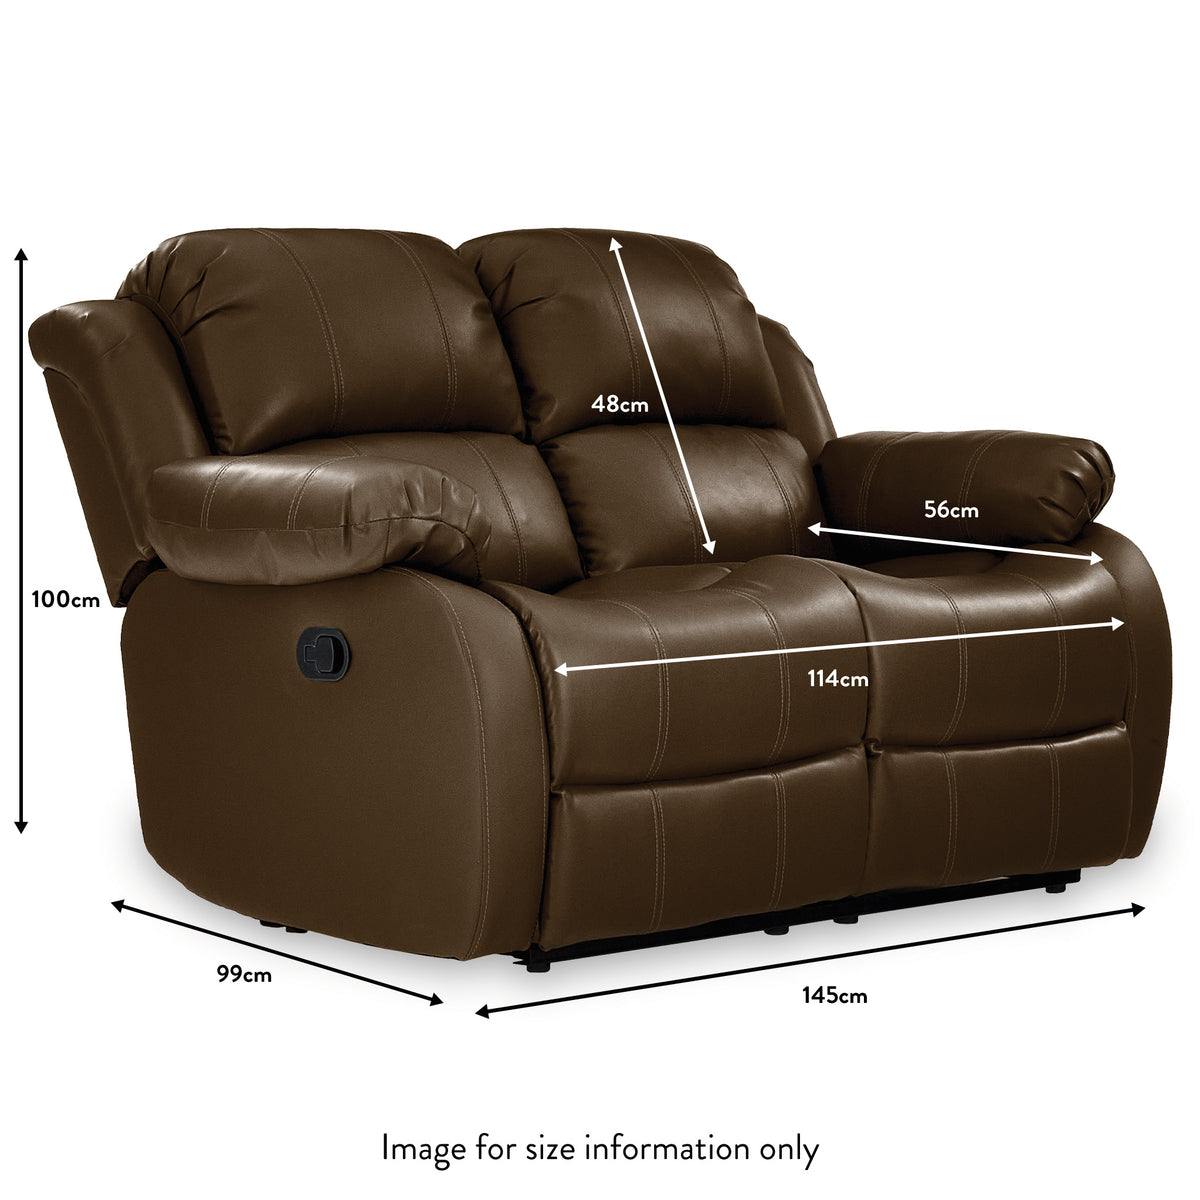 Anton Brown Leather Reclining 2 Seater Sofa dimensions